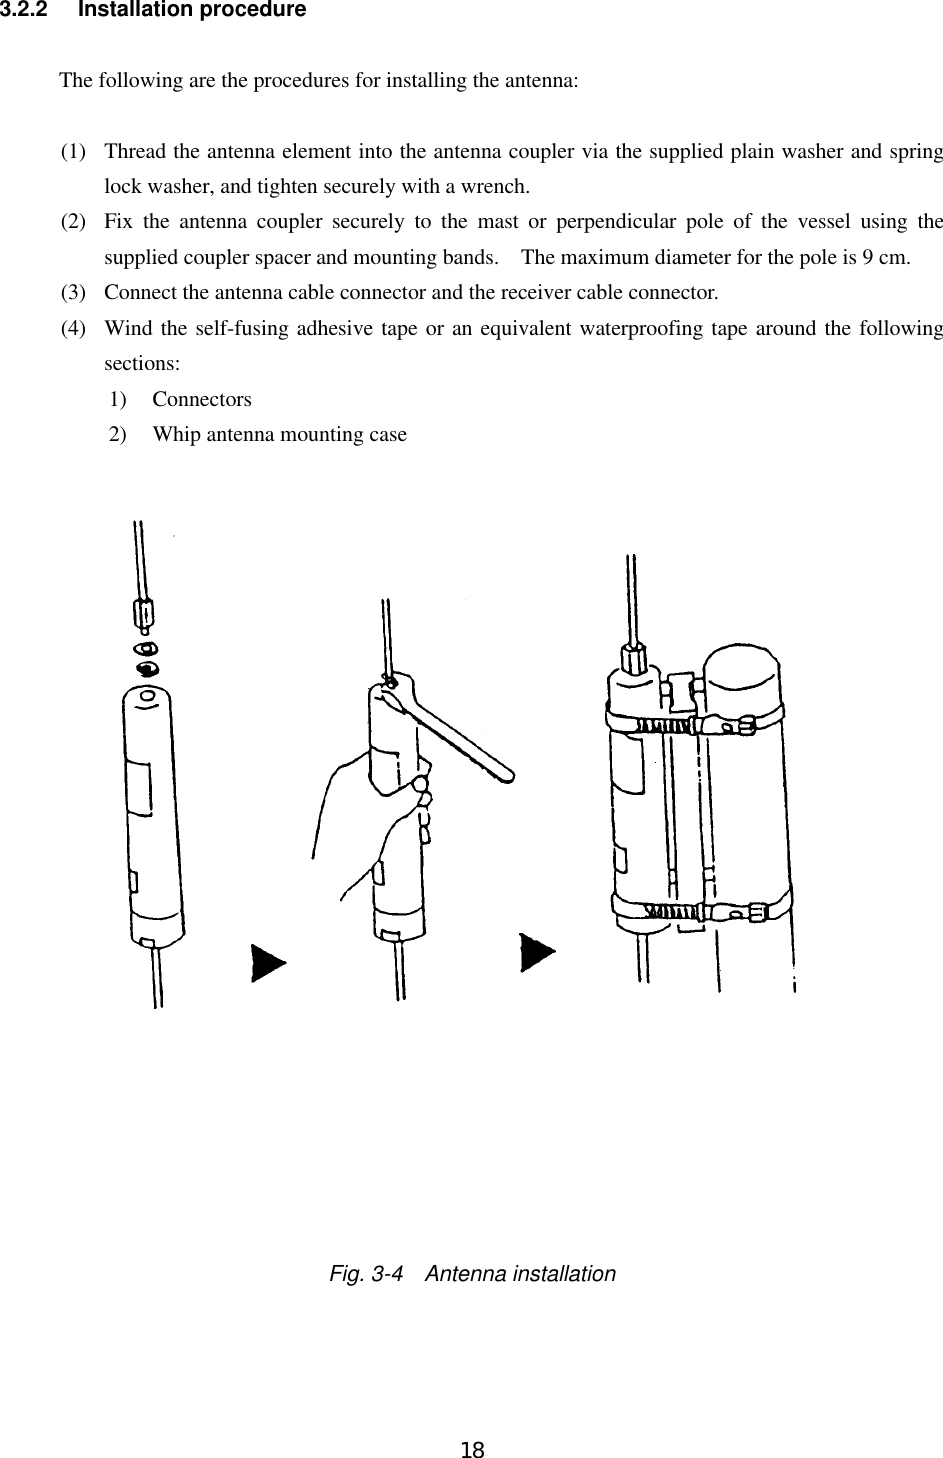 183.2.2 Installation procedureThe following are the procedures for installing the antenna:(1)  Thread the antenna element into the antenna coupler via the supplied plain washer and springlock washer, and tighten securely with a wrench.(2)  Fix the antenna coupler securely to the mast or perpendicular pole of the vessel using thesupplied coupler spacer and mounting bands.  The maximum diameter for the pole is 9 cm.(3)  Connect the antenna cable connector and the receiver cable connector.(4)  Wind the self-fusing adhesive tape or an equivalent waterproofing tape around the followingsections:1) Connectors2) Whip antenna mounting caseFig. 3-4  Antenna installation